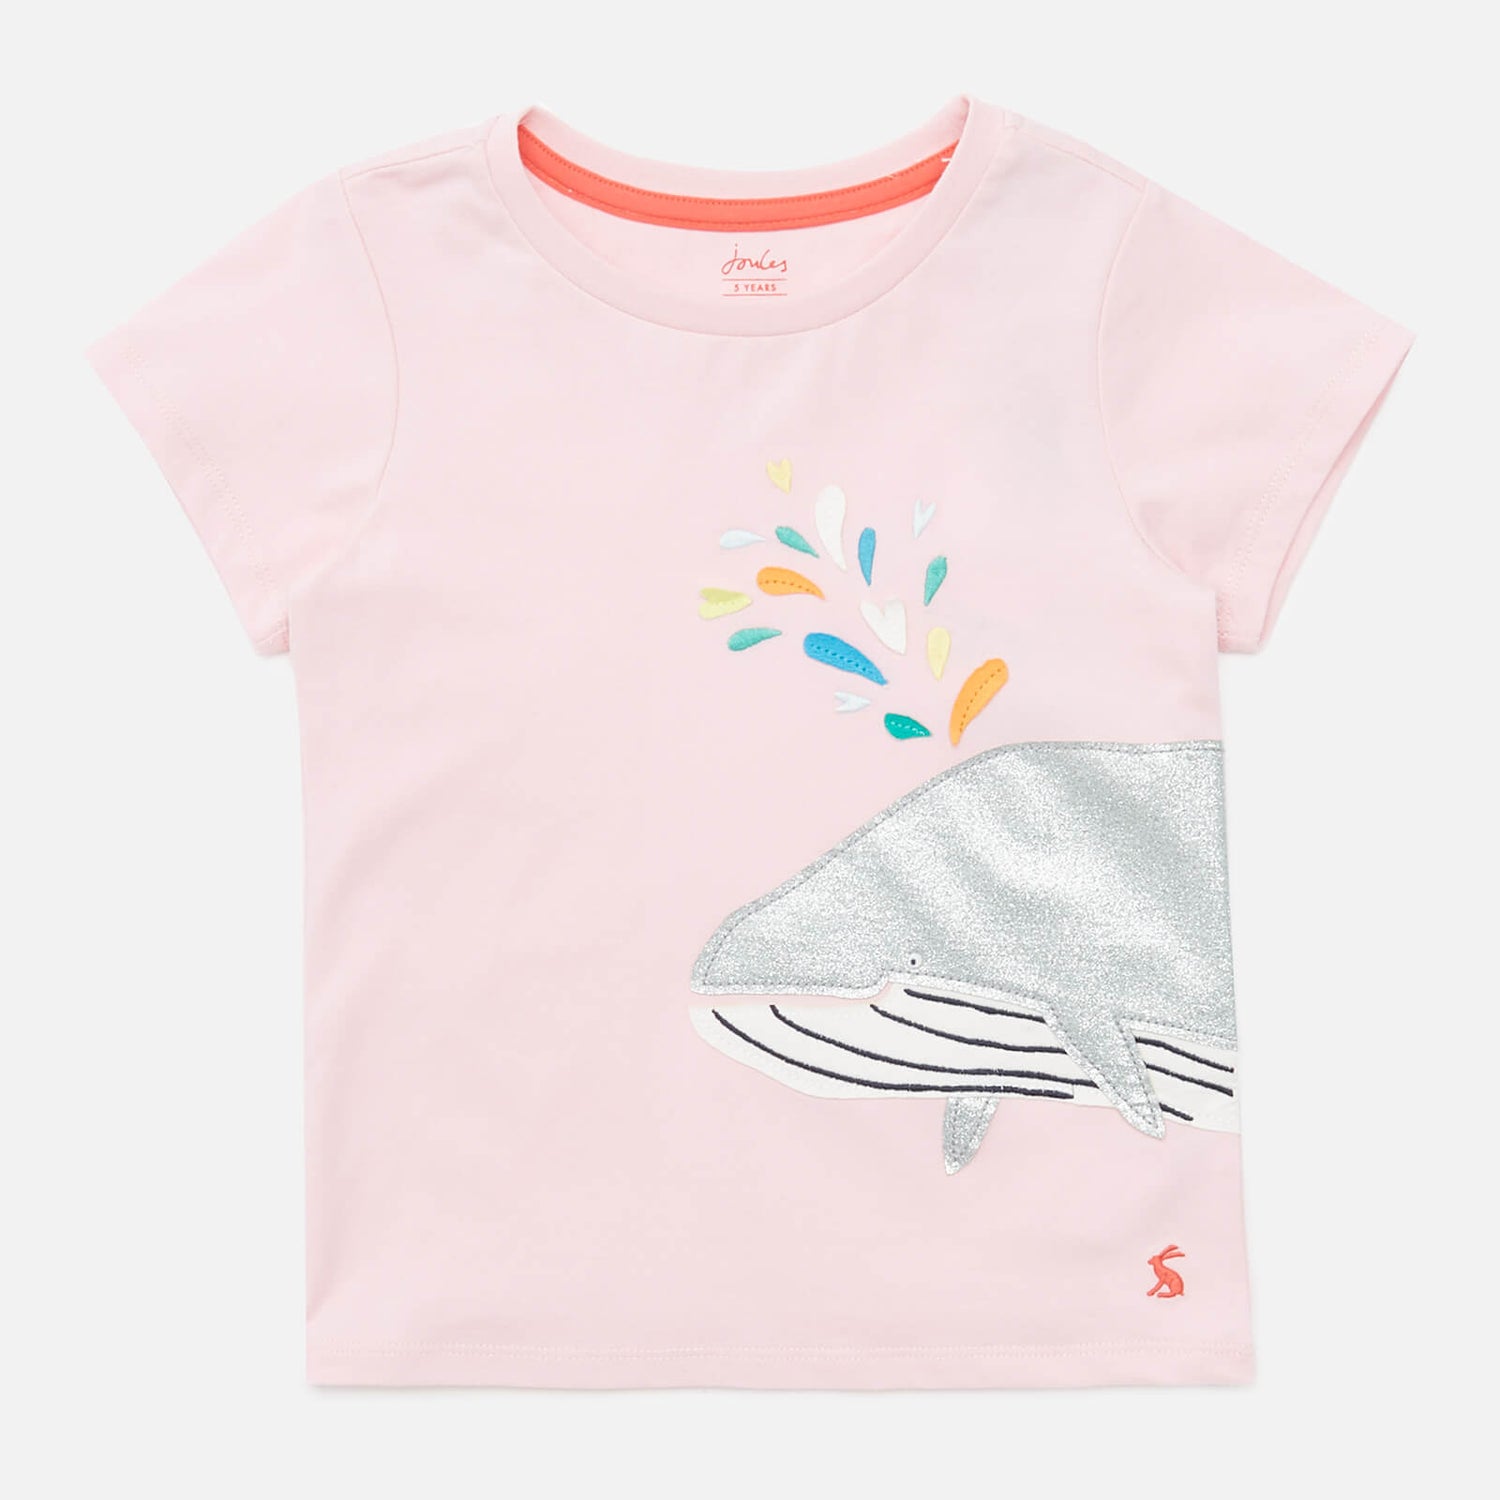 Joules Kids' Shorts Sleeve 2 Way Sequin Artwork T-Shirt - Pink Whale - 3 Years